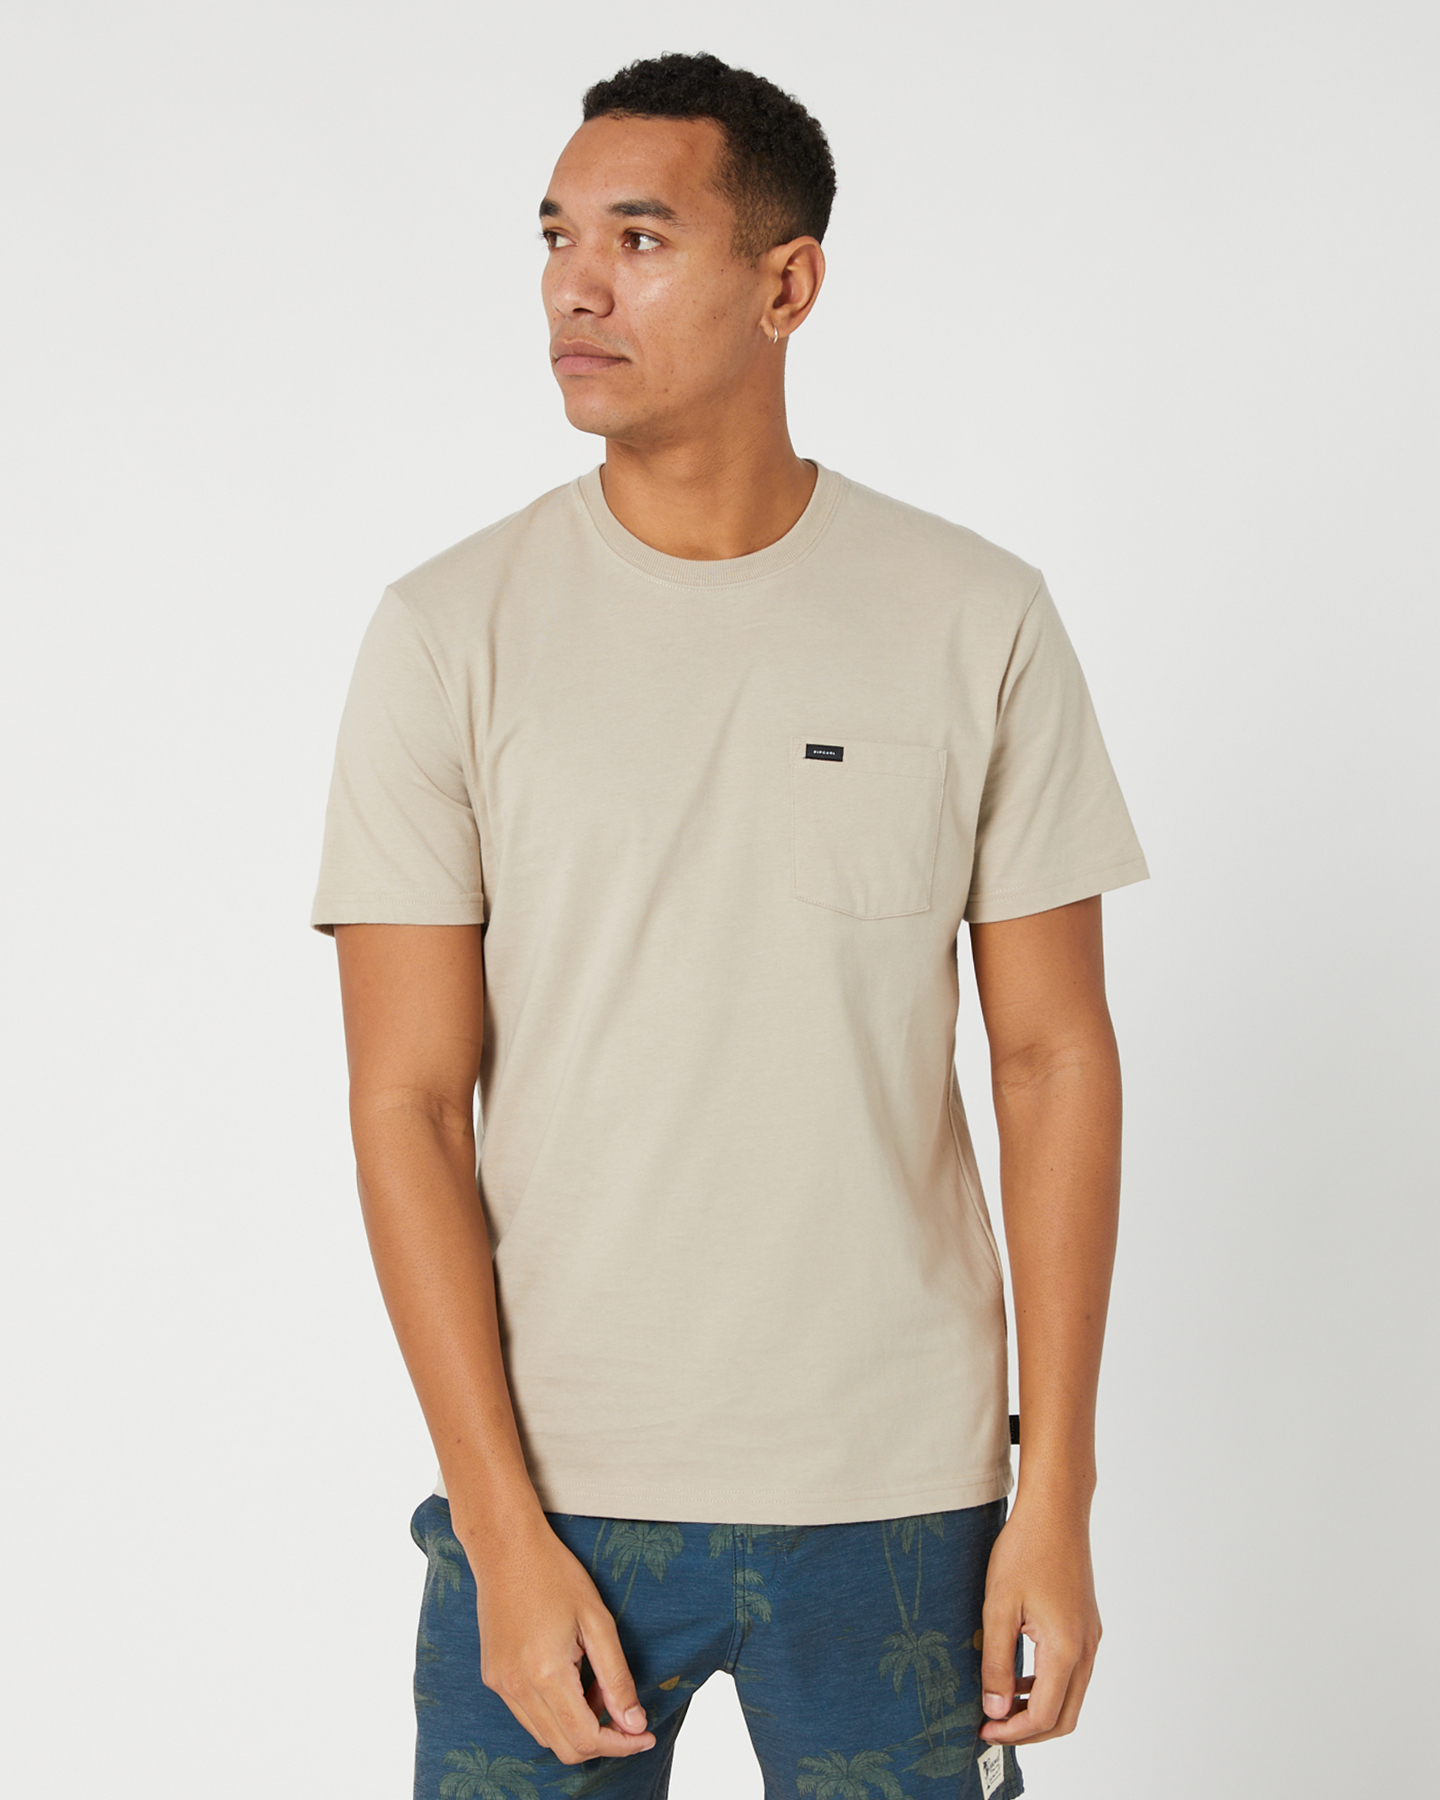 Rip Curl Plain Pocket Mens Ss Tee - Taupe | SurfStitch